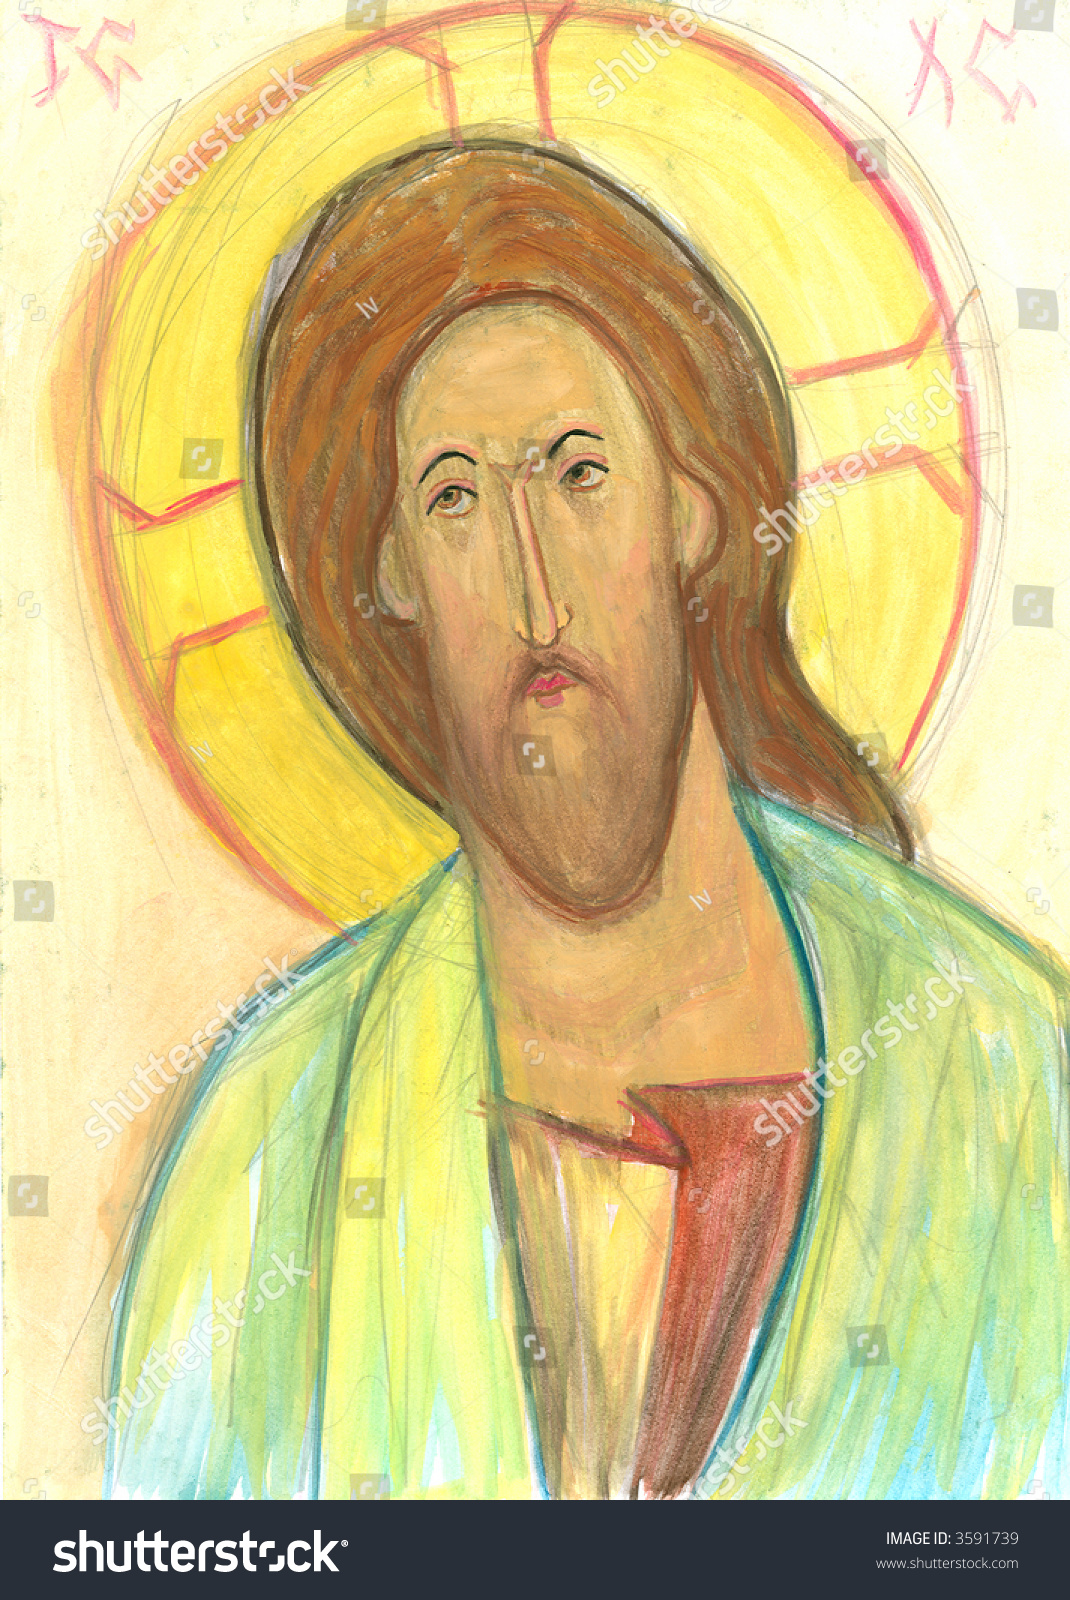 Jesus, Watercolor On The Paper, I Am An Author Stock Photo 3591739 ...